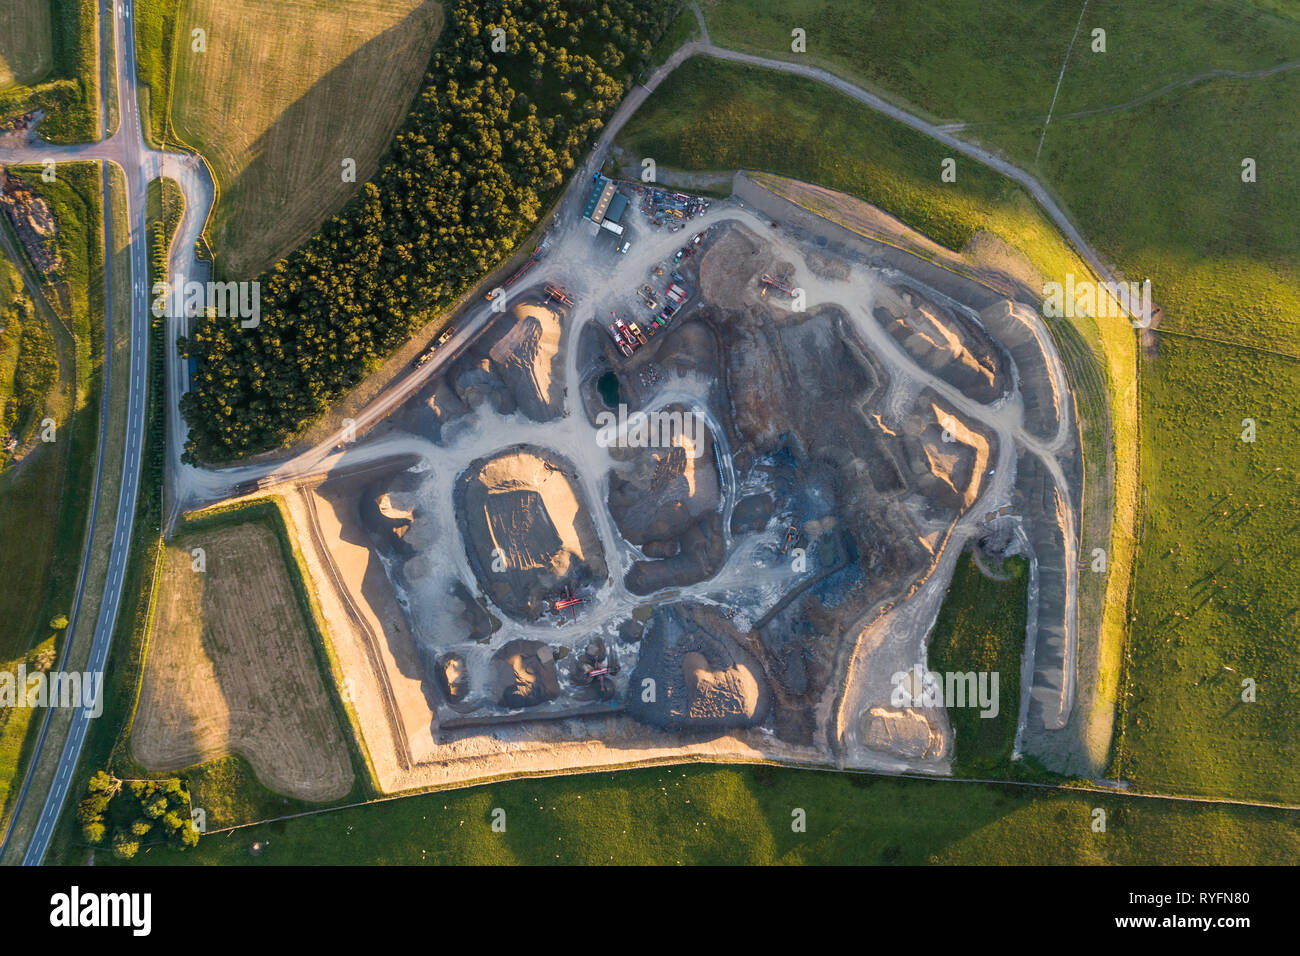 A small aggregate quarry in South Lanarkshire photographed from above in evening light showing crushers, grading machines and piles of aggregate. Stock Photo